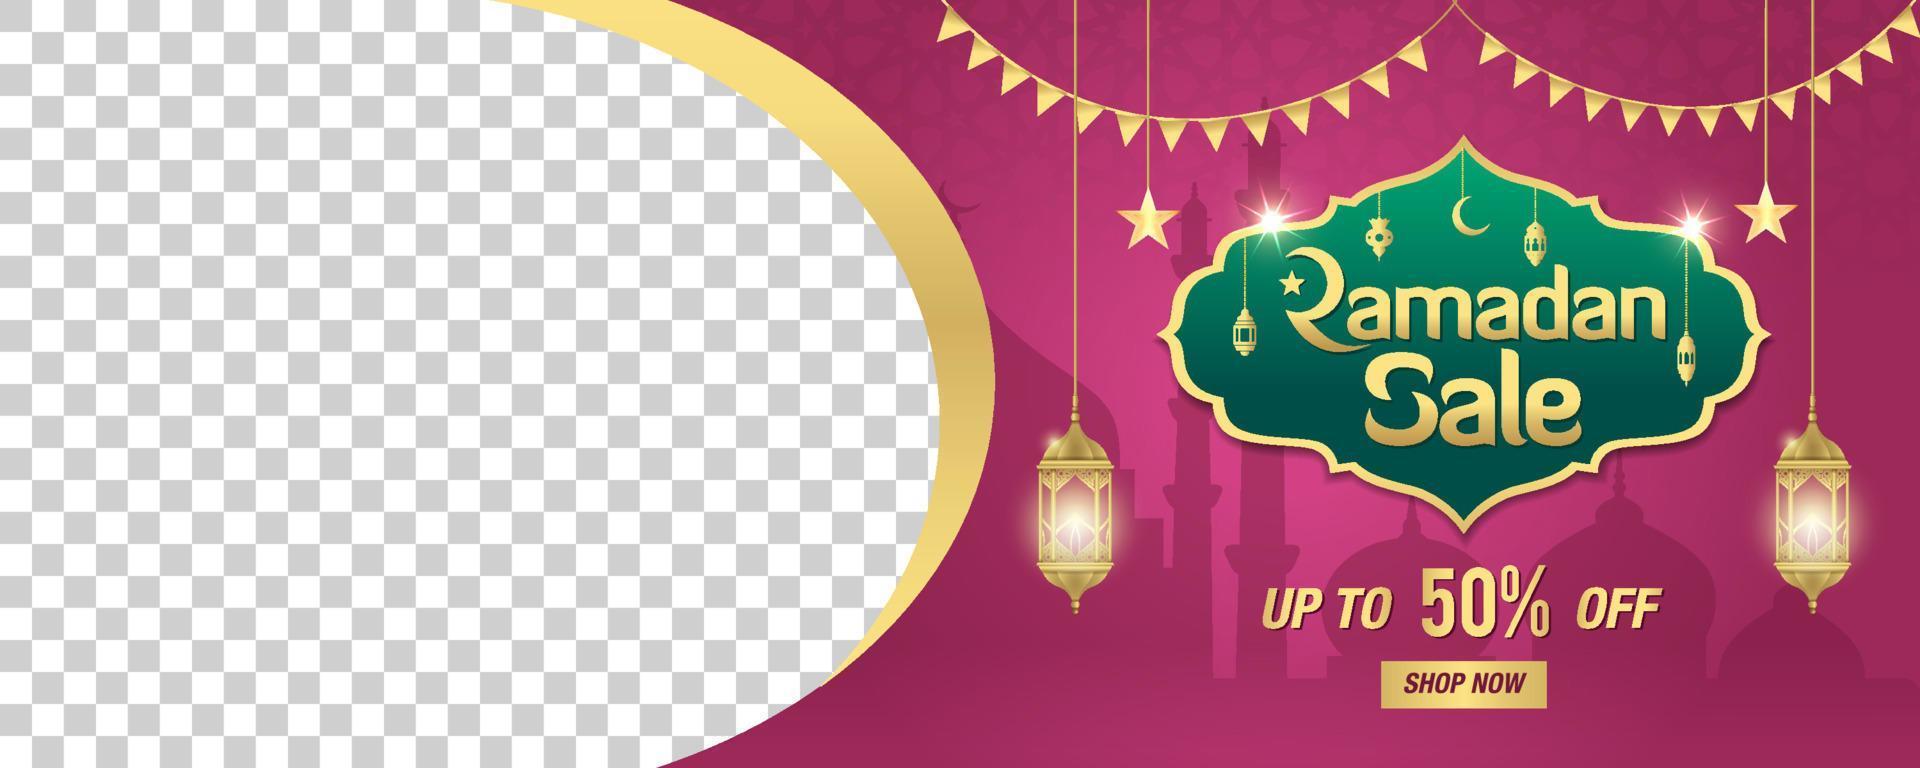 Ramadan Sale, web header or banner design with golden shiny frame, arabic lanterns and space for image vector